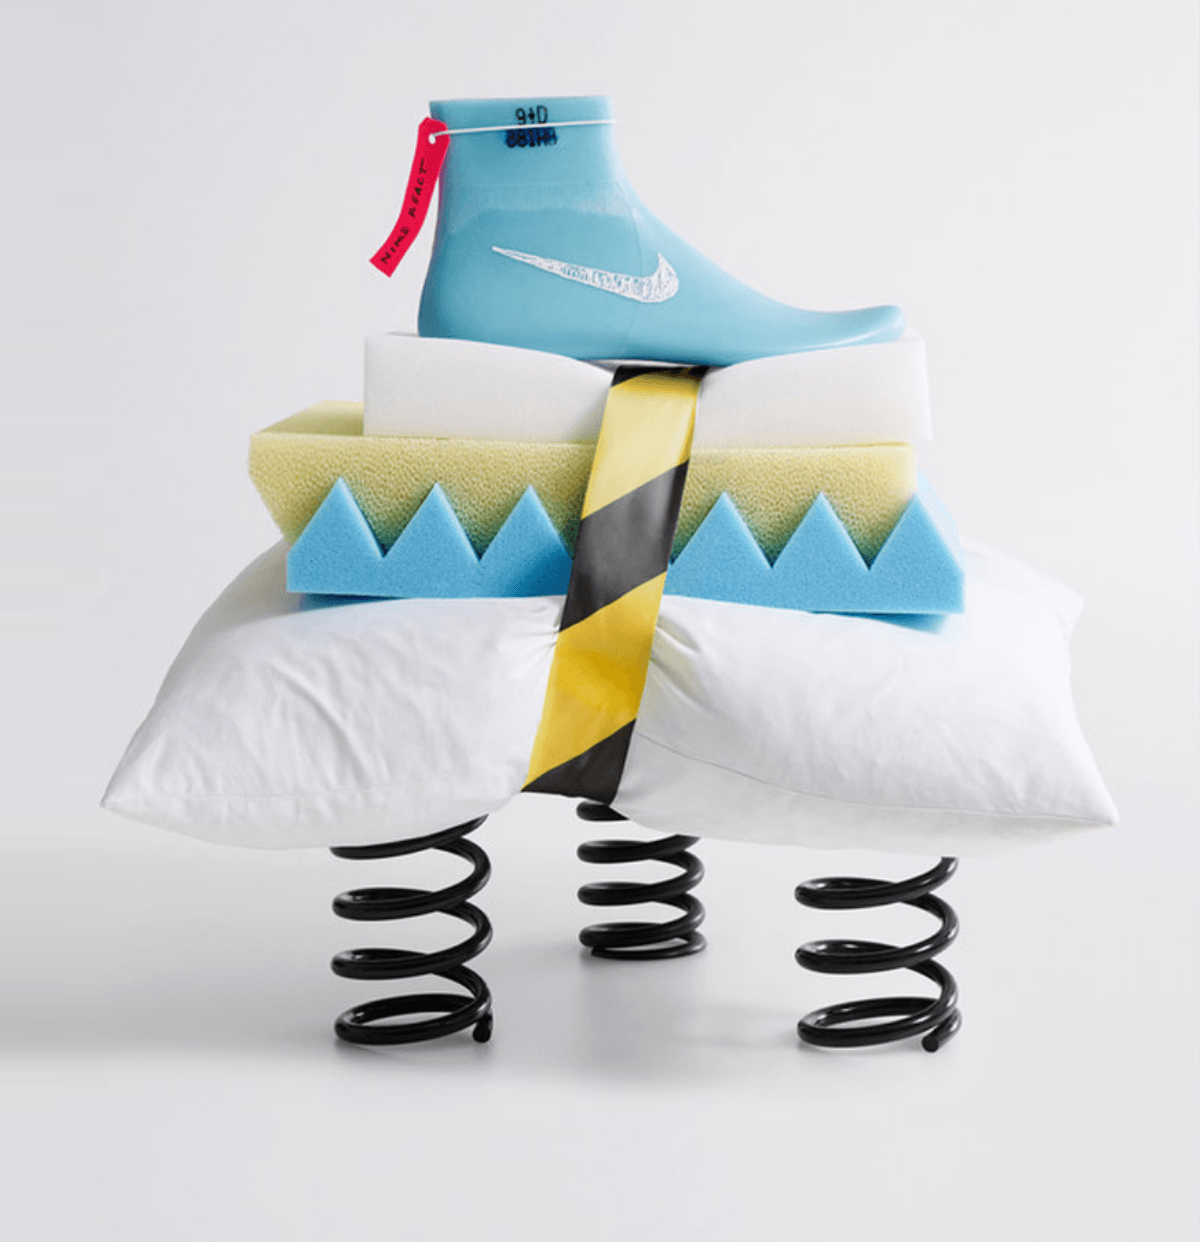 Nike shoe mold with multiple layers of thick foam, a pillow and 3 large springs